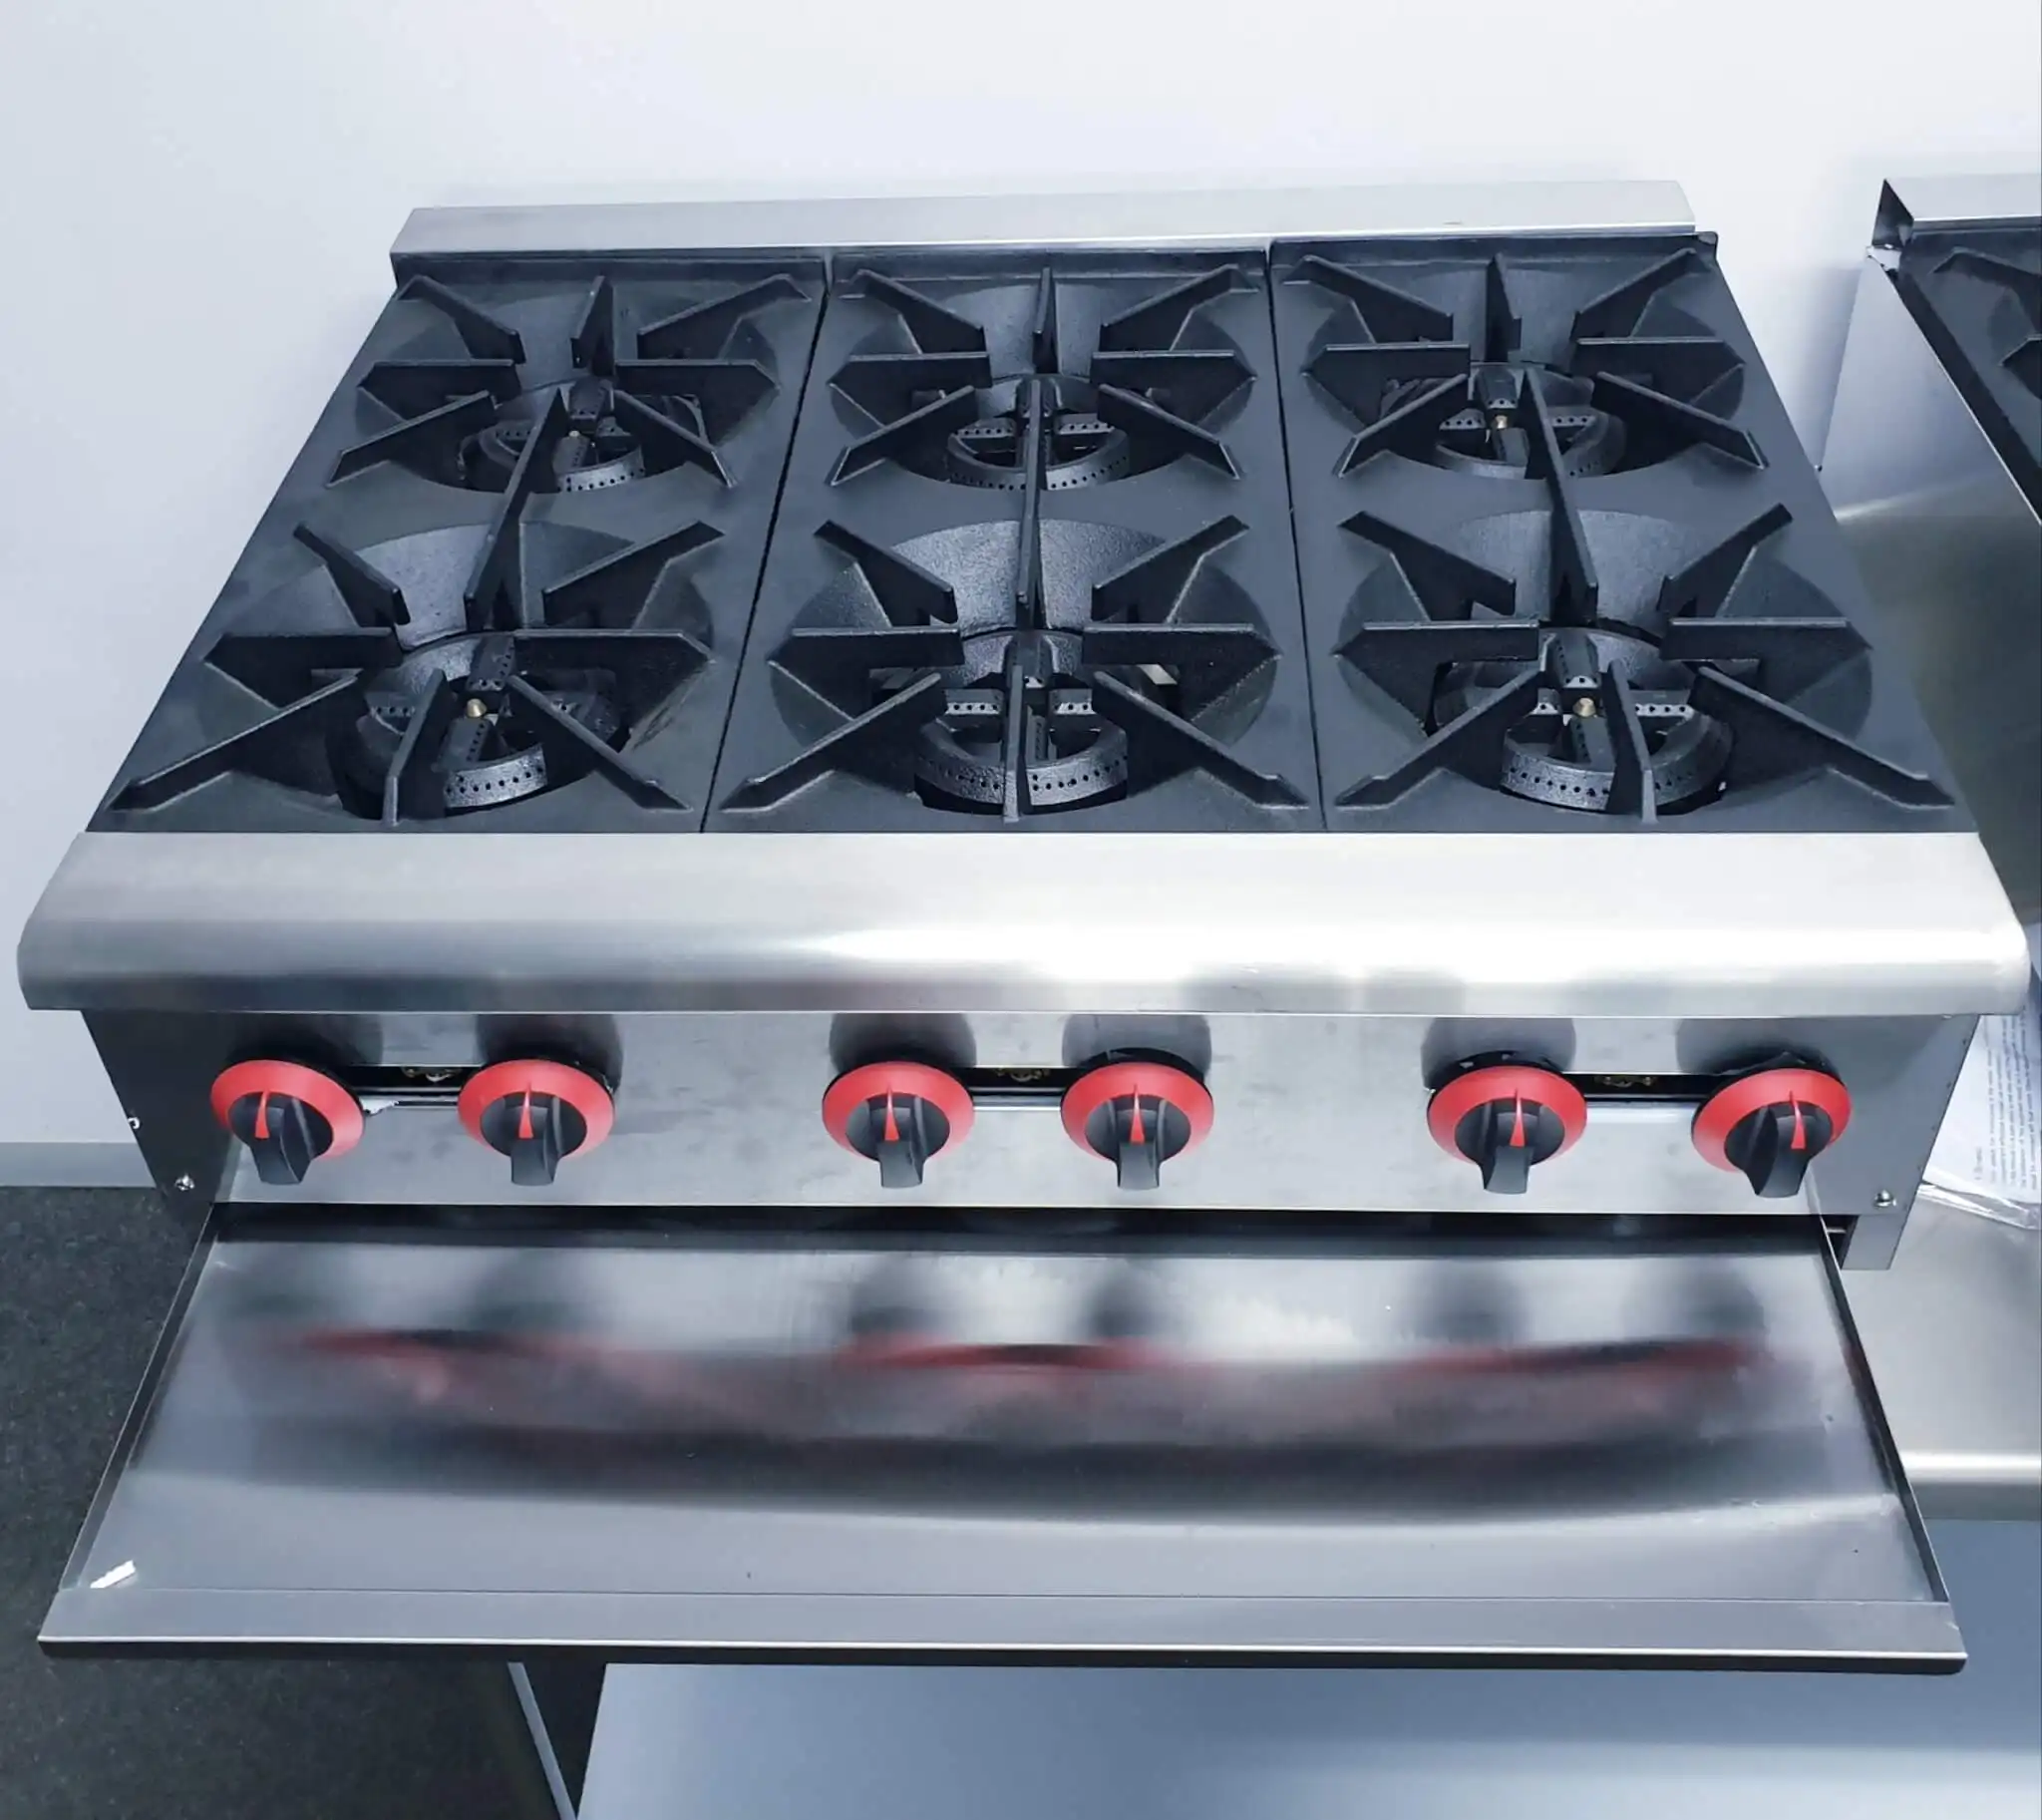 Gas Stove Commercial cooktop Industrial Kitchen 6 Burner Energy Saving Cooking Range